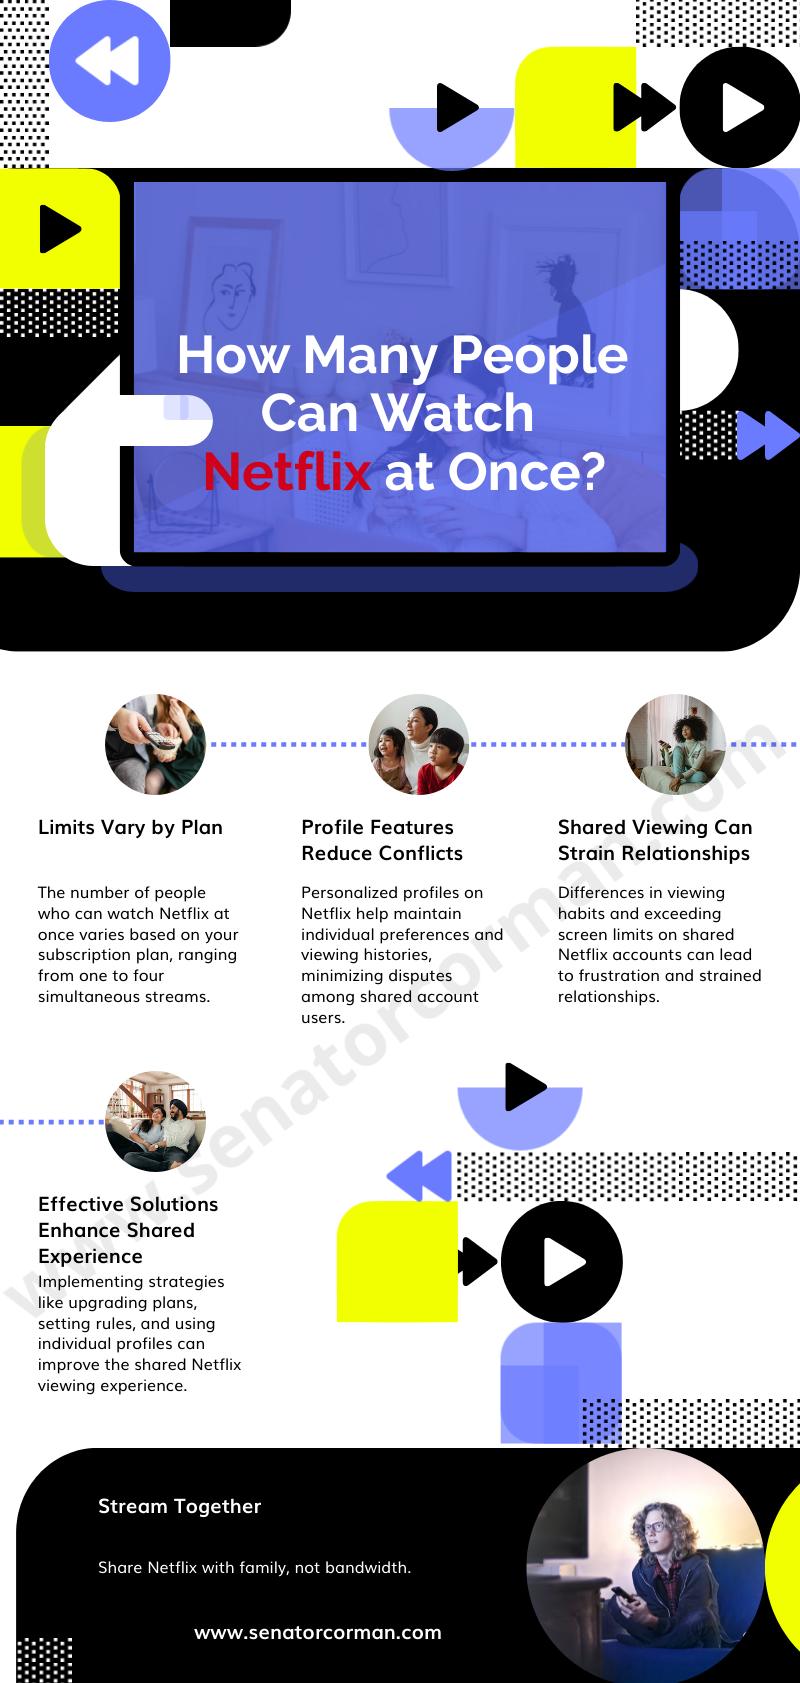 This infographic shows information how many people can watch Netflix at once